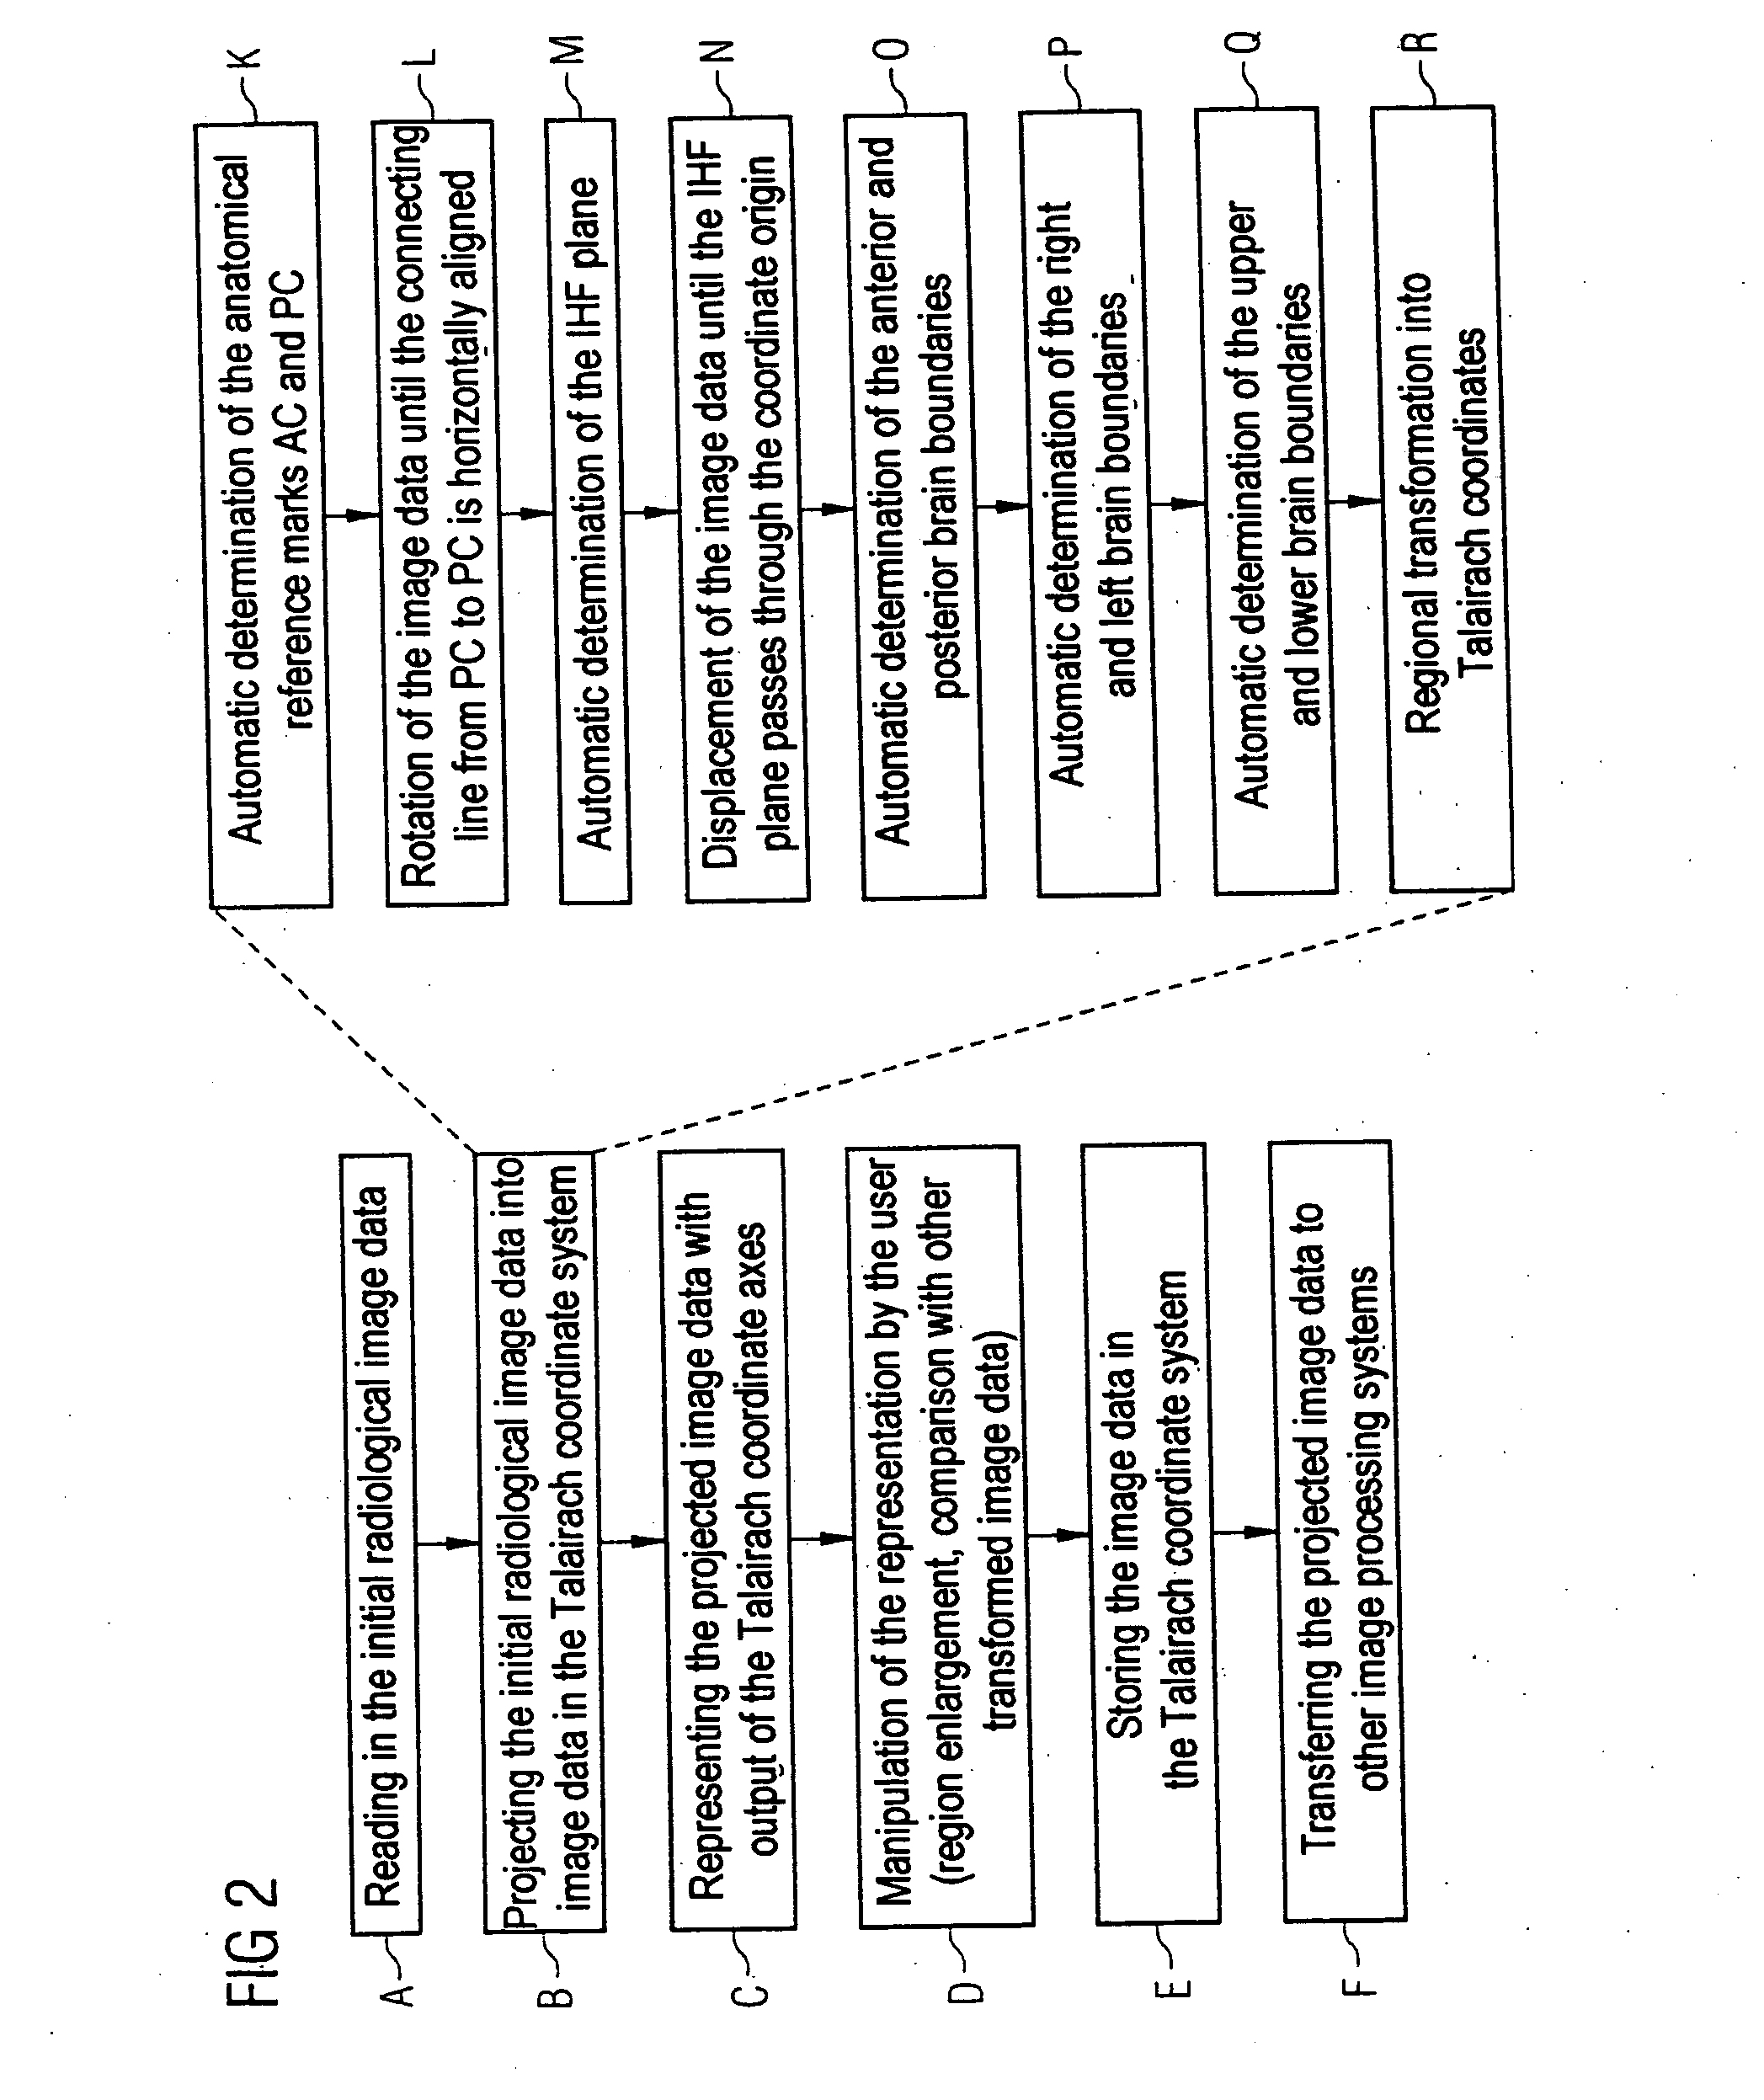 Method for projecting radiological image data into a neuroanatomical coordinate system